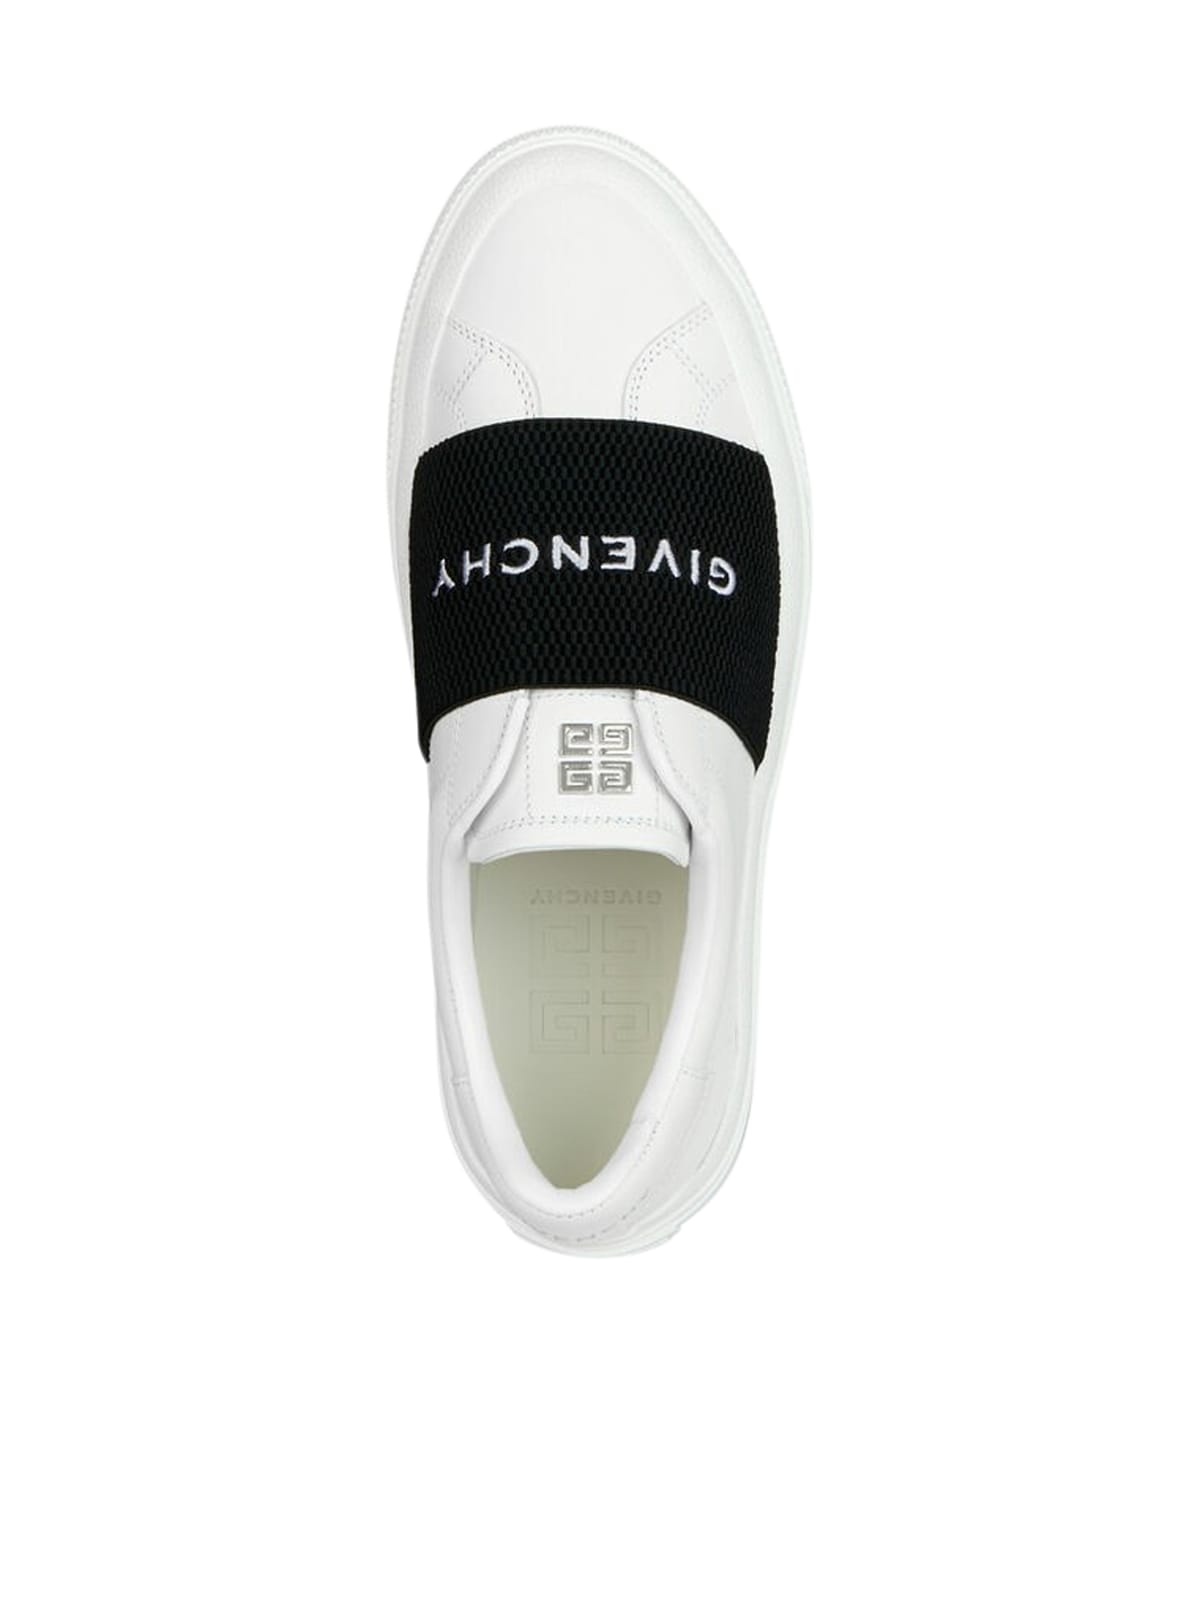 Shop Givenchy City Sport Elastic Sneaker In White Black